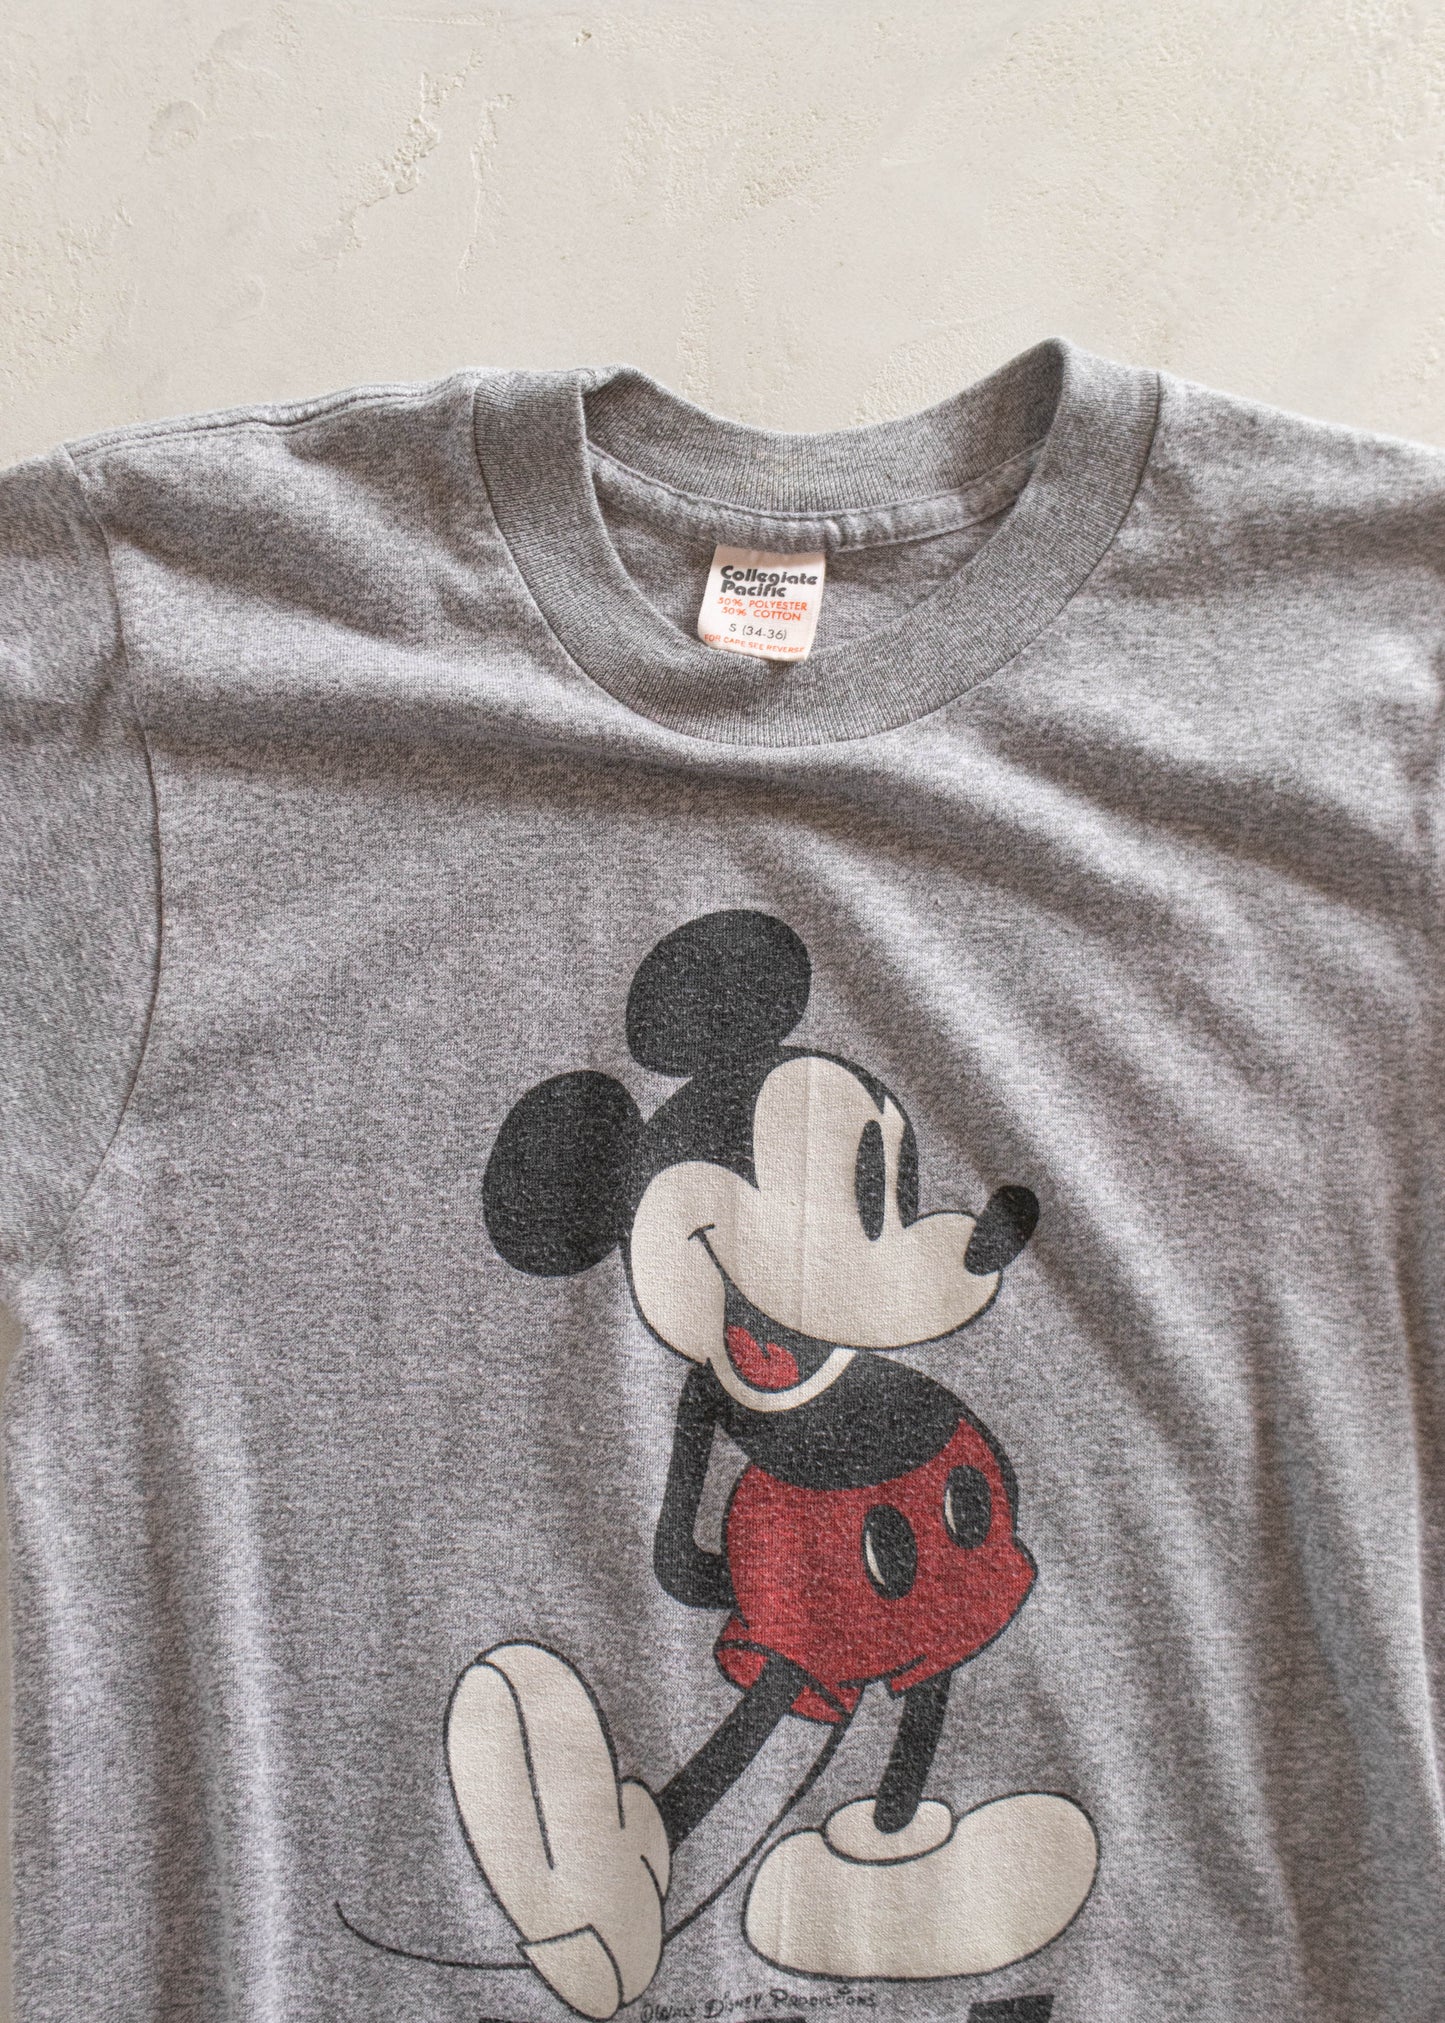 Vintage 1980s Collegiate Pacific Mickey Mouse T-Shirt Size 2XS/XS